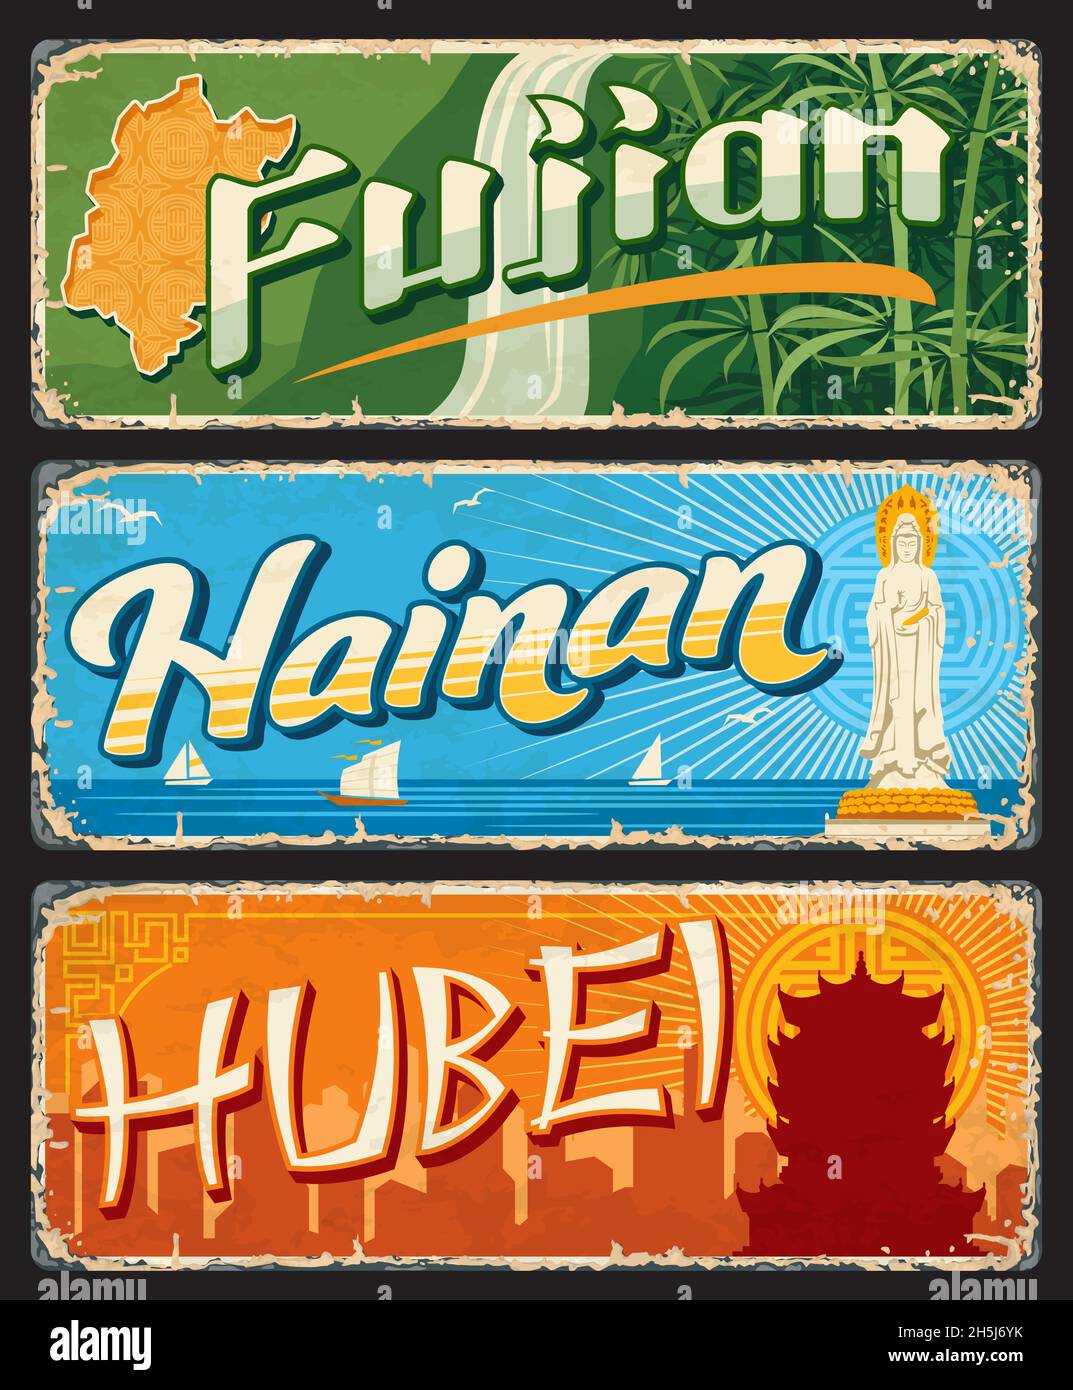 Hubei, Hainan and Fujian chinese province plates and travel stickers, vector. China cities tin signs or luggage tags with province taglines and sights Stock Vector